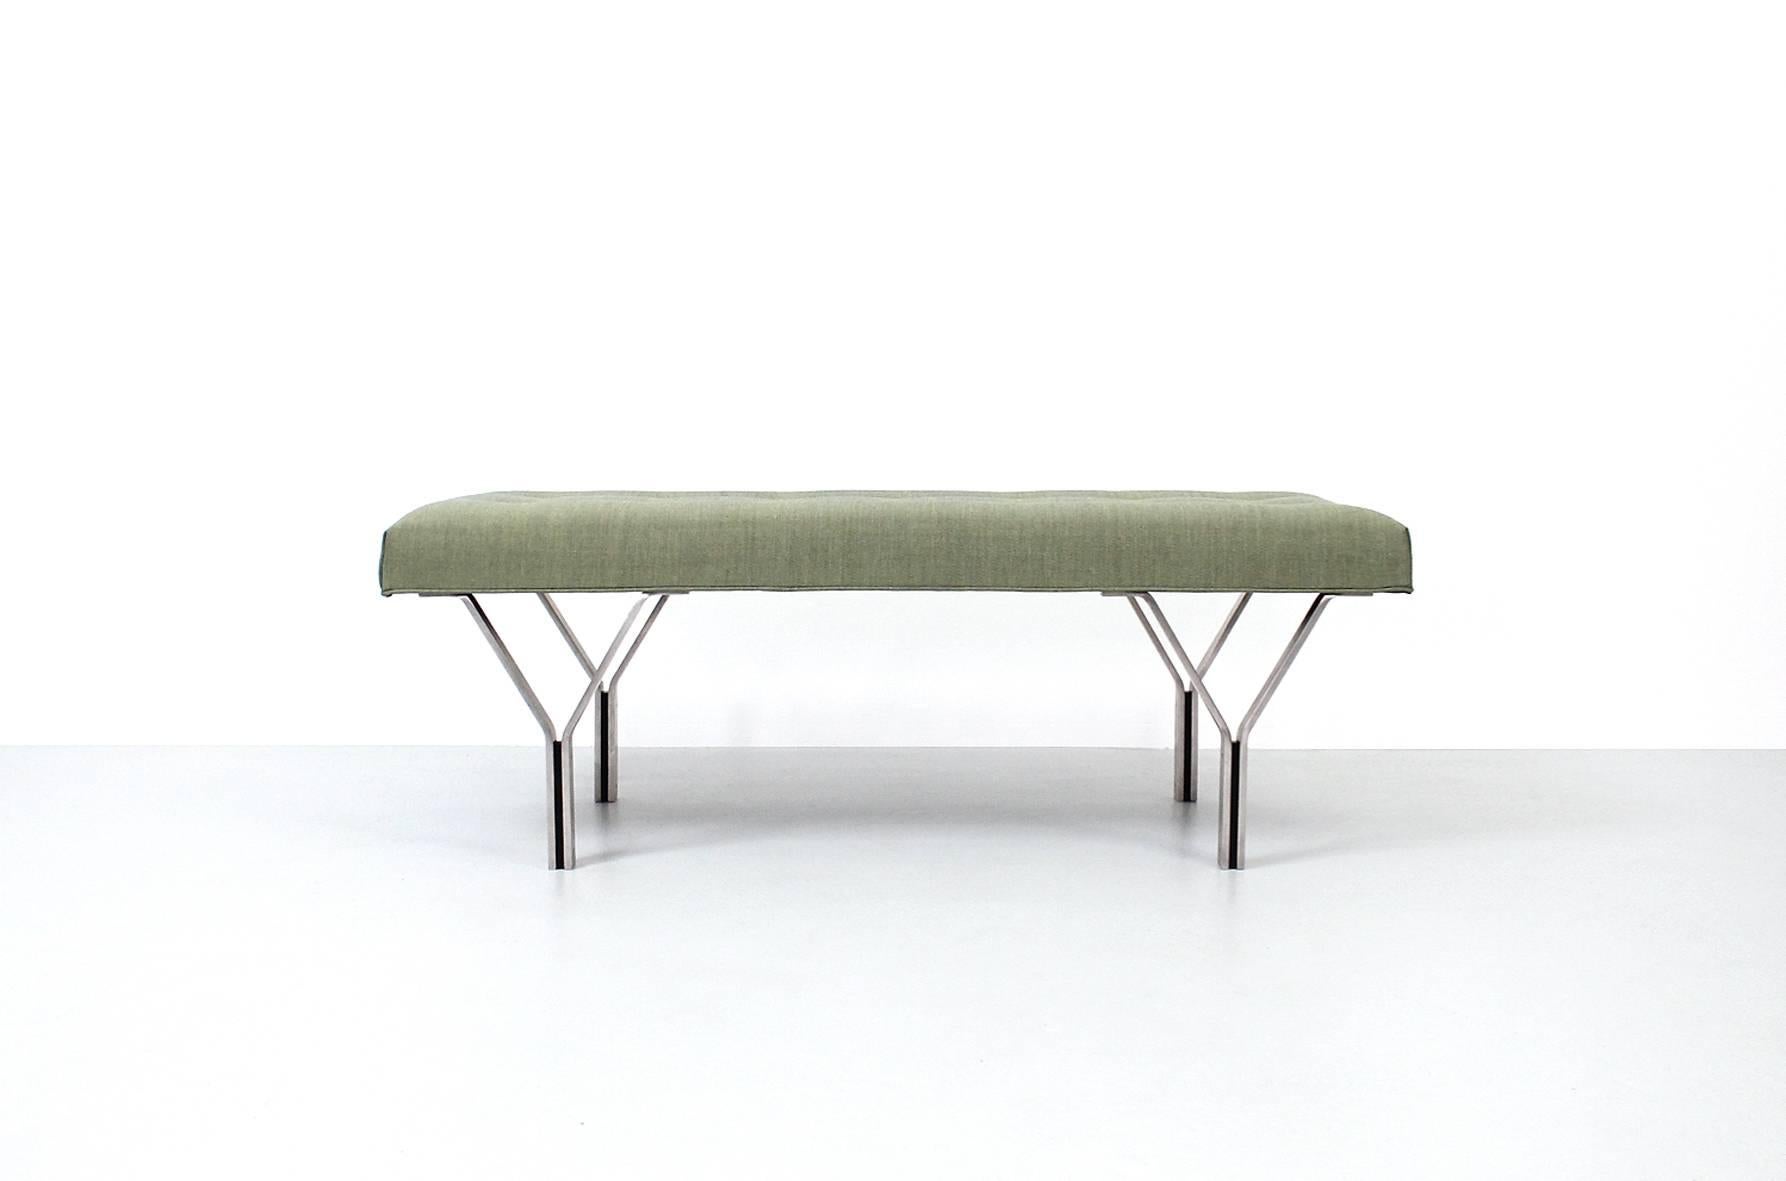 Architectural upholstered bench with steel Y-frame legs. Great scale for a variety of applications. Made by Cumberland Furniture. Recently upholstered in Maharam fabric.
 